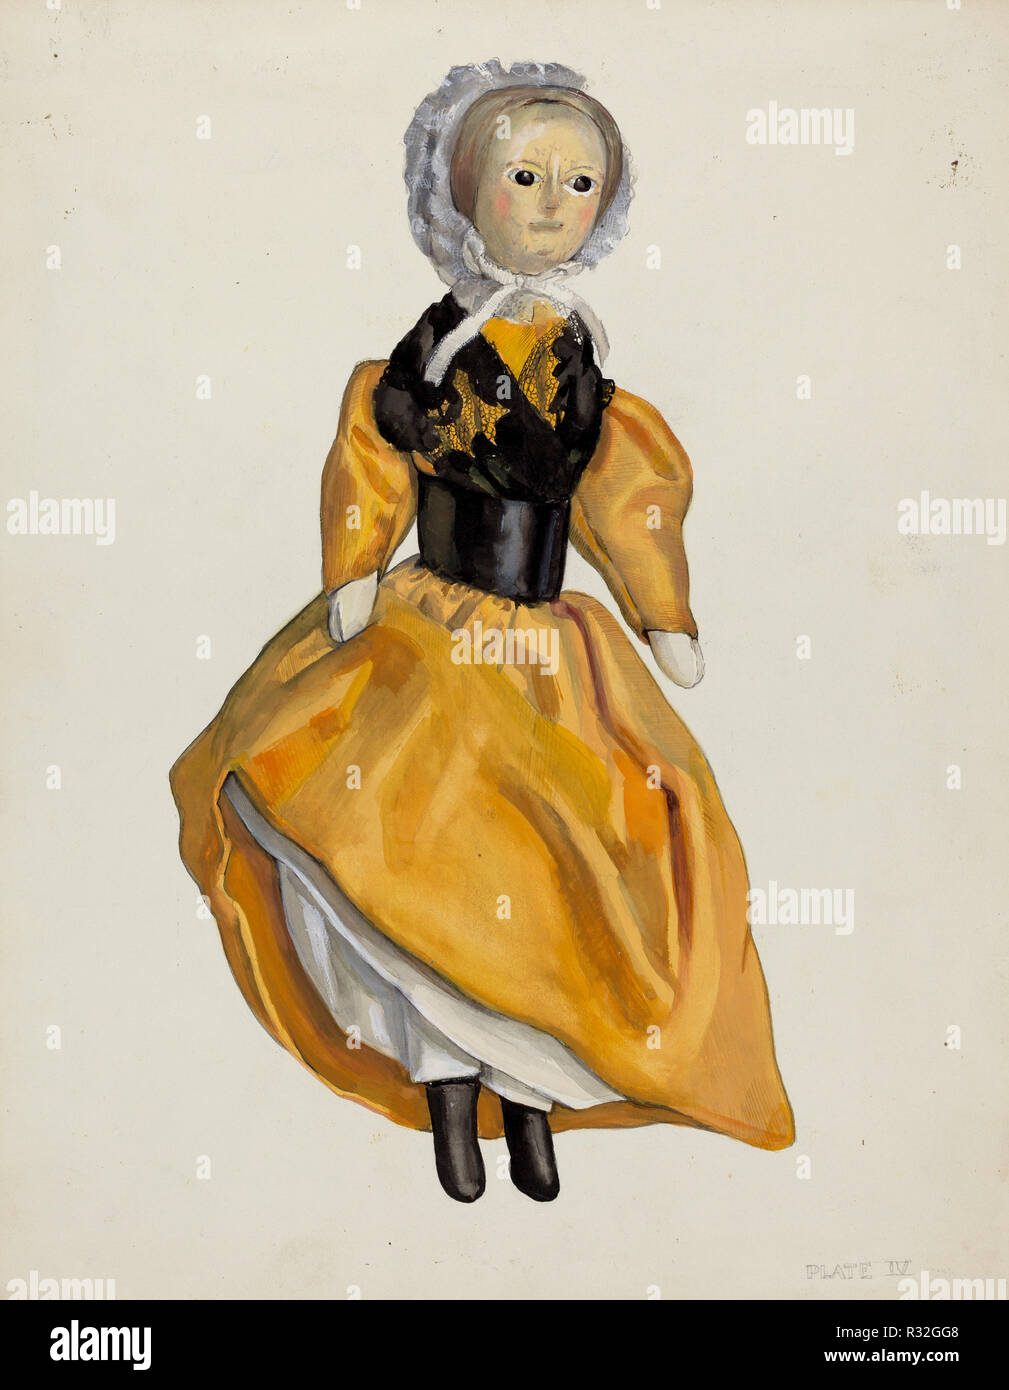 Wooden Jointed Doll. Dated: c. 1936. Dimensions: overall: 35.4 x 27.8 cm (13 15/16 x 10 15/16 in.)  Original IAD Object: 12' long. Medium: watercolor, graphite, gouache, and pen and ink on paper. Museum: National Gallery of Art, Washington DC. Author: Jane Iverson. Stock Photo